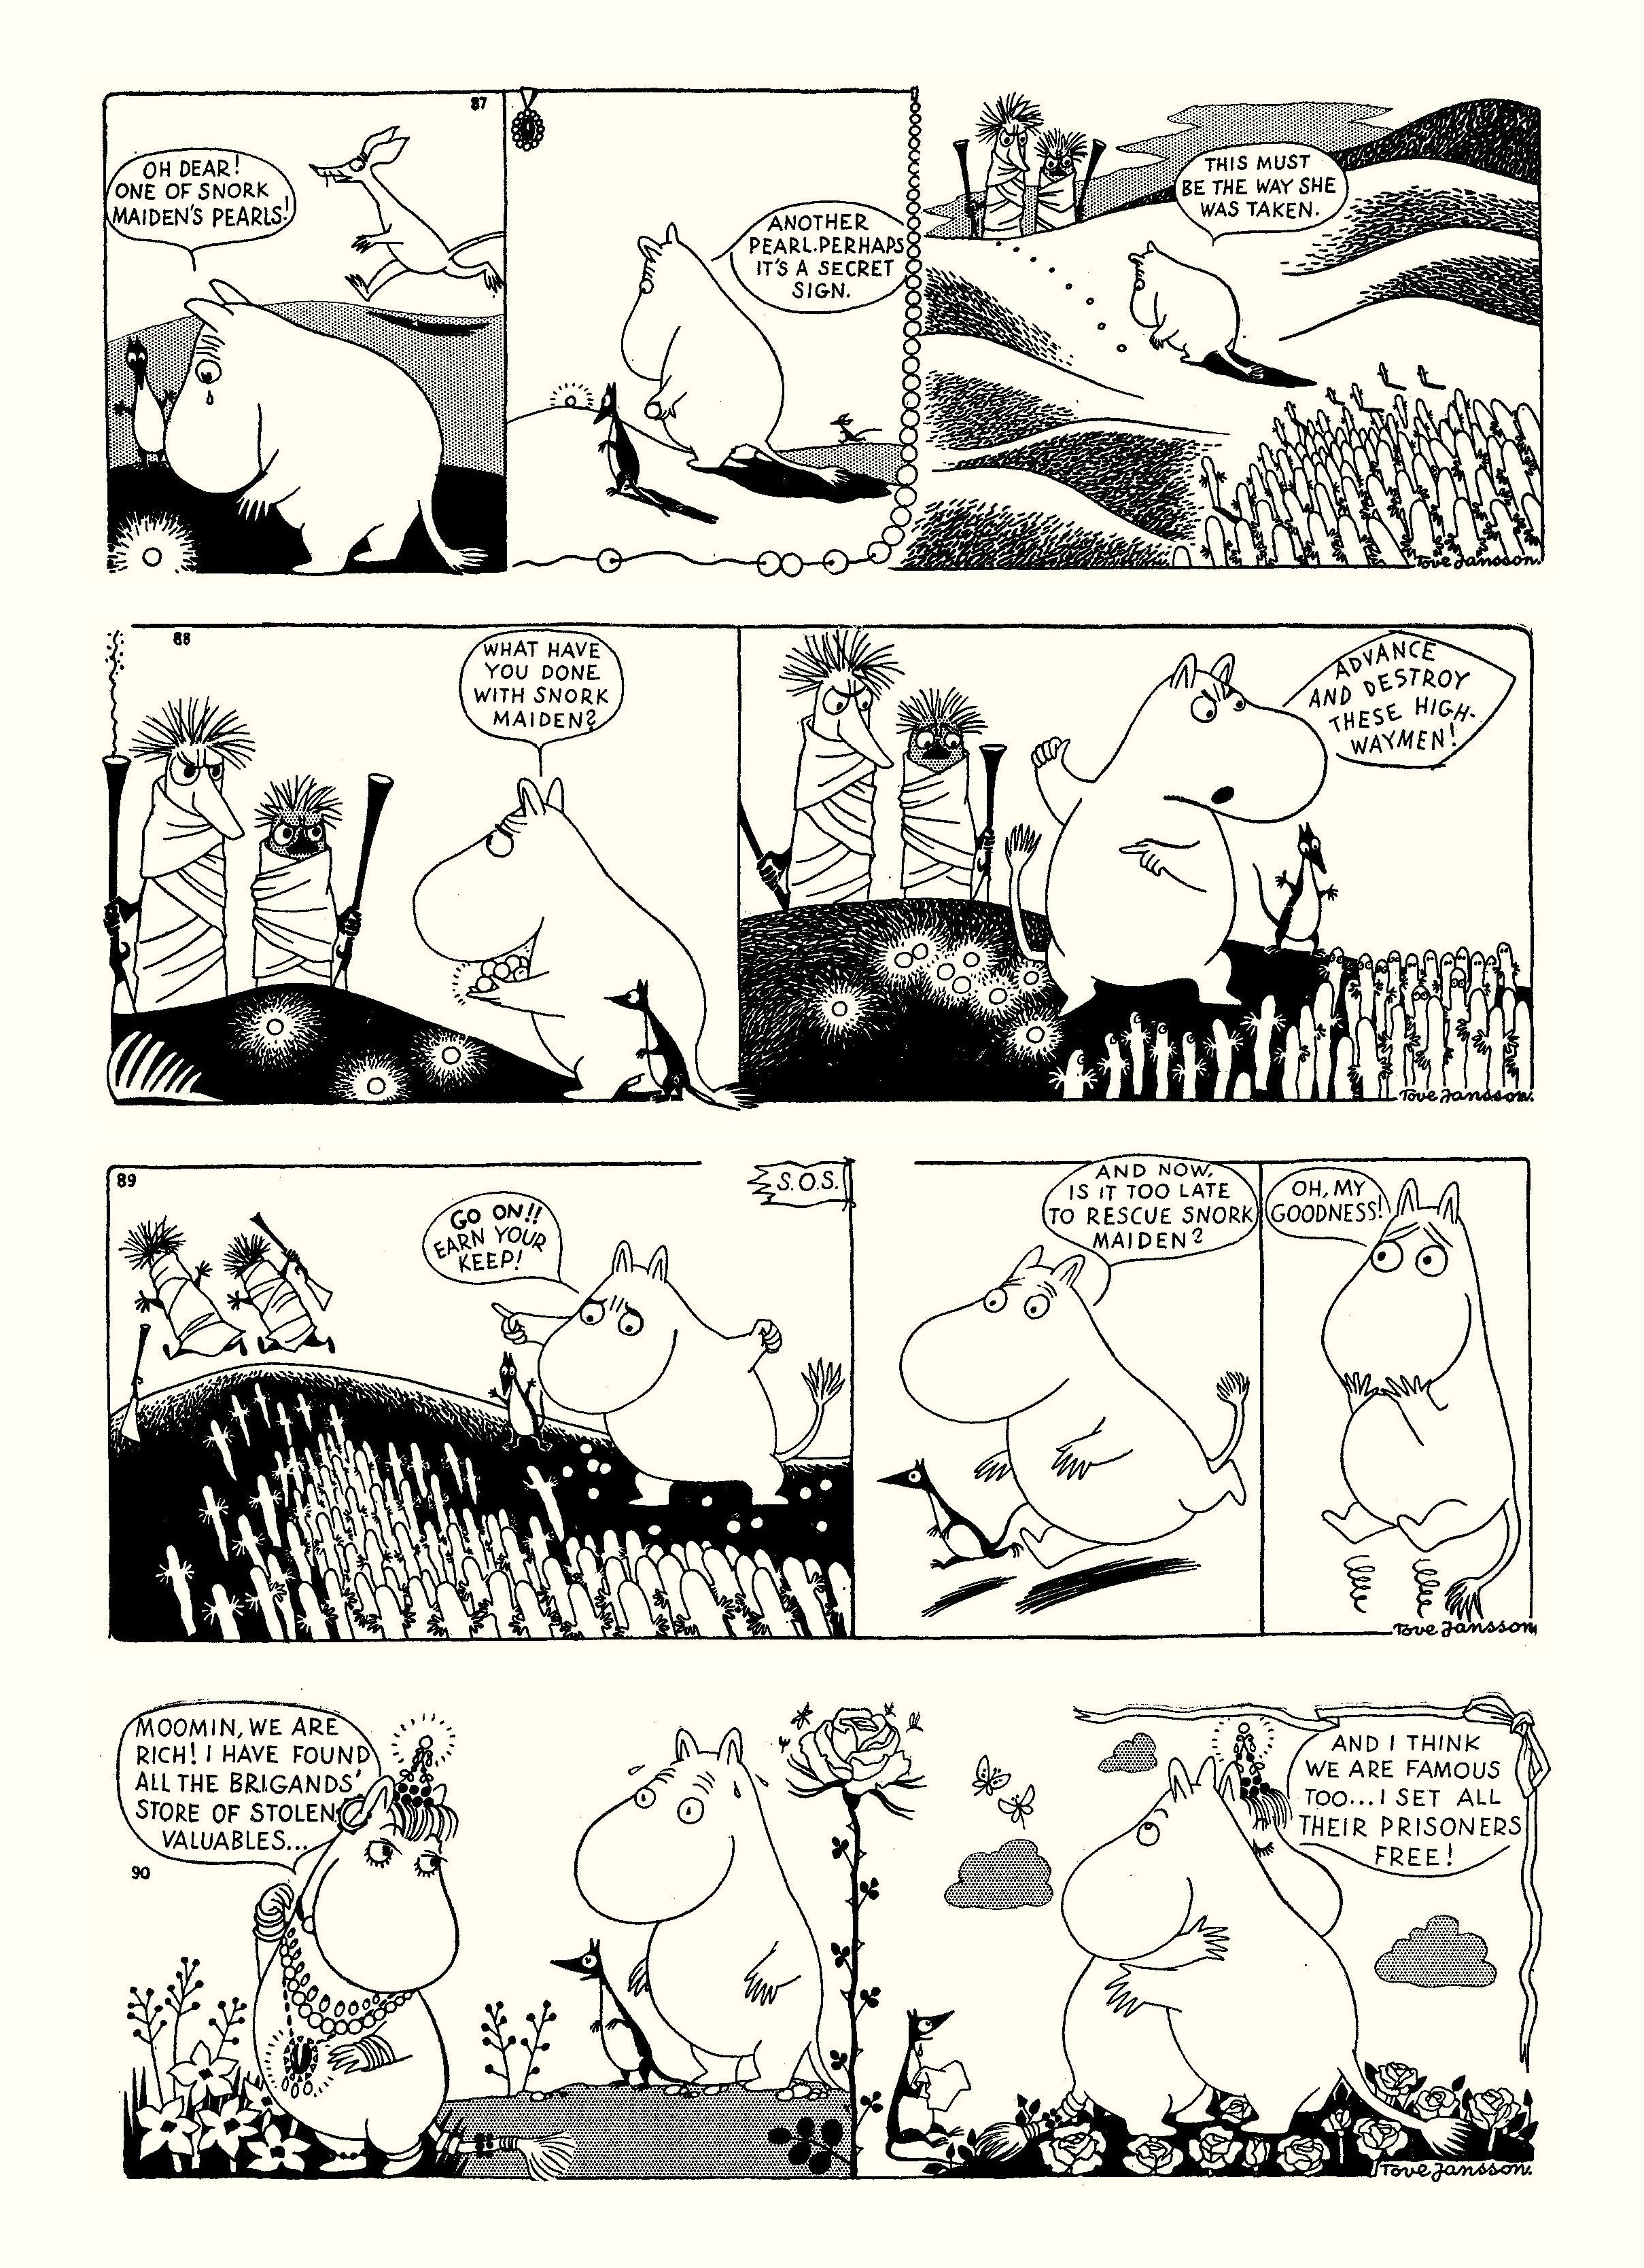 Read online Moomin: The Complete Tove Jansson Comic Strip comic -  Issue # TPB 1 - 28